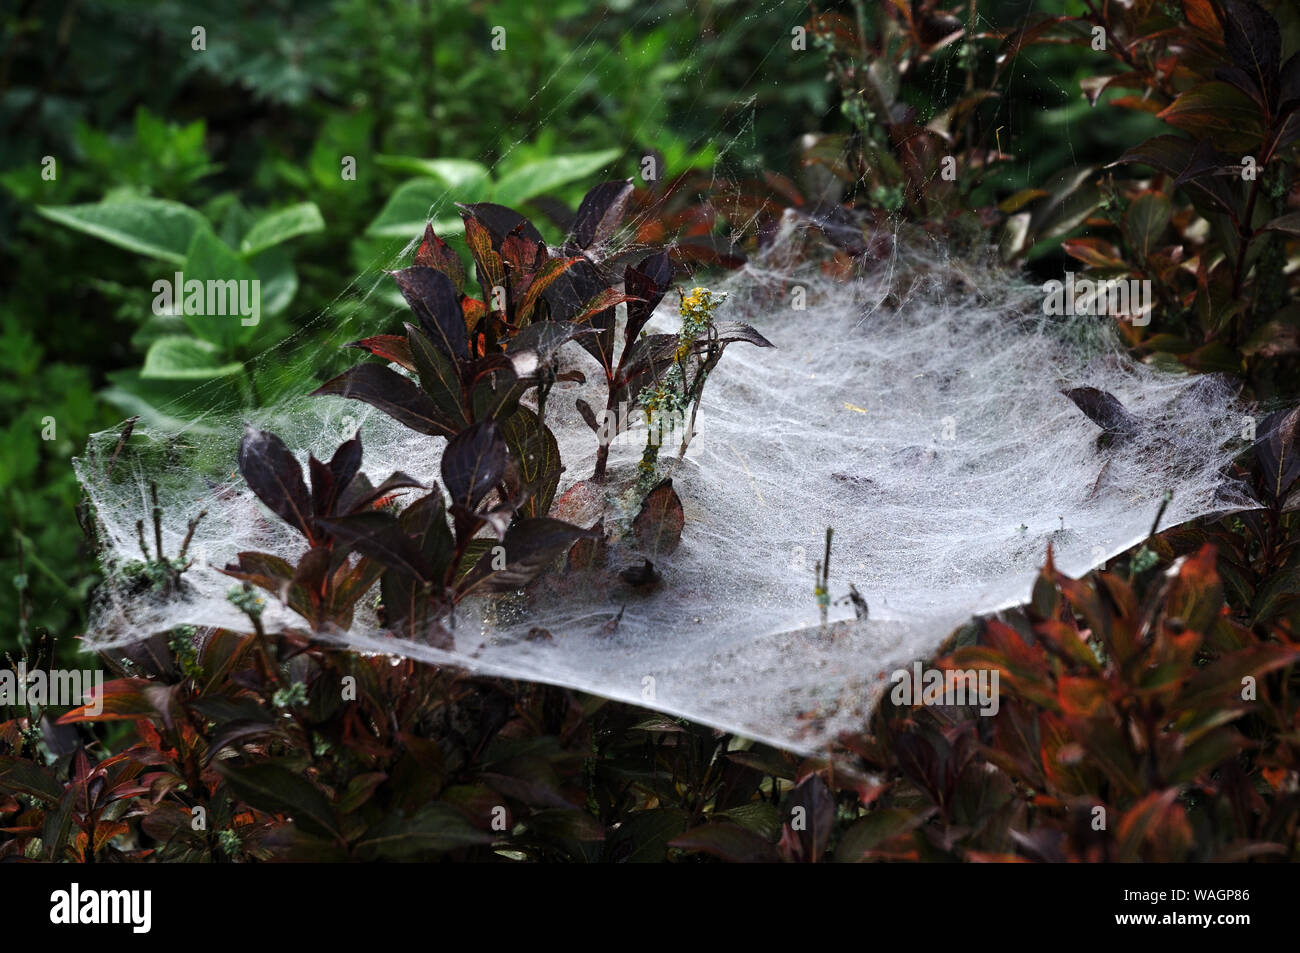 dew in large and dense spider web in a garden hedge with dogwood shrubs Stock Photo